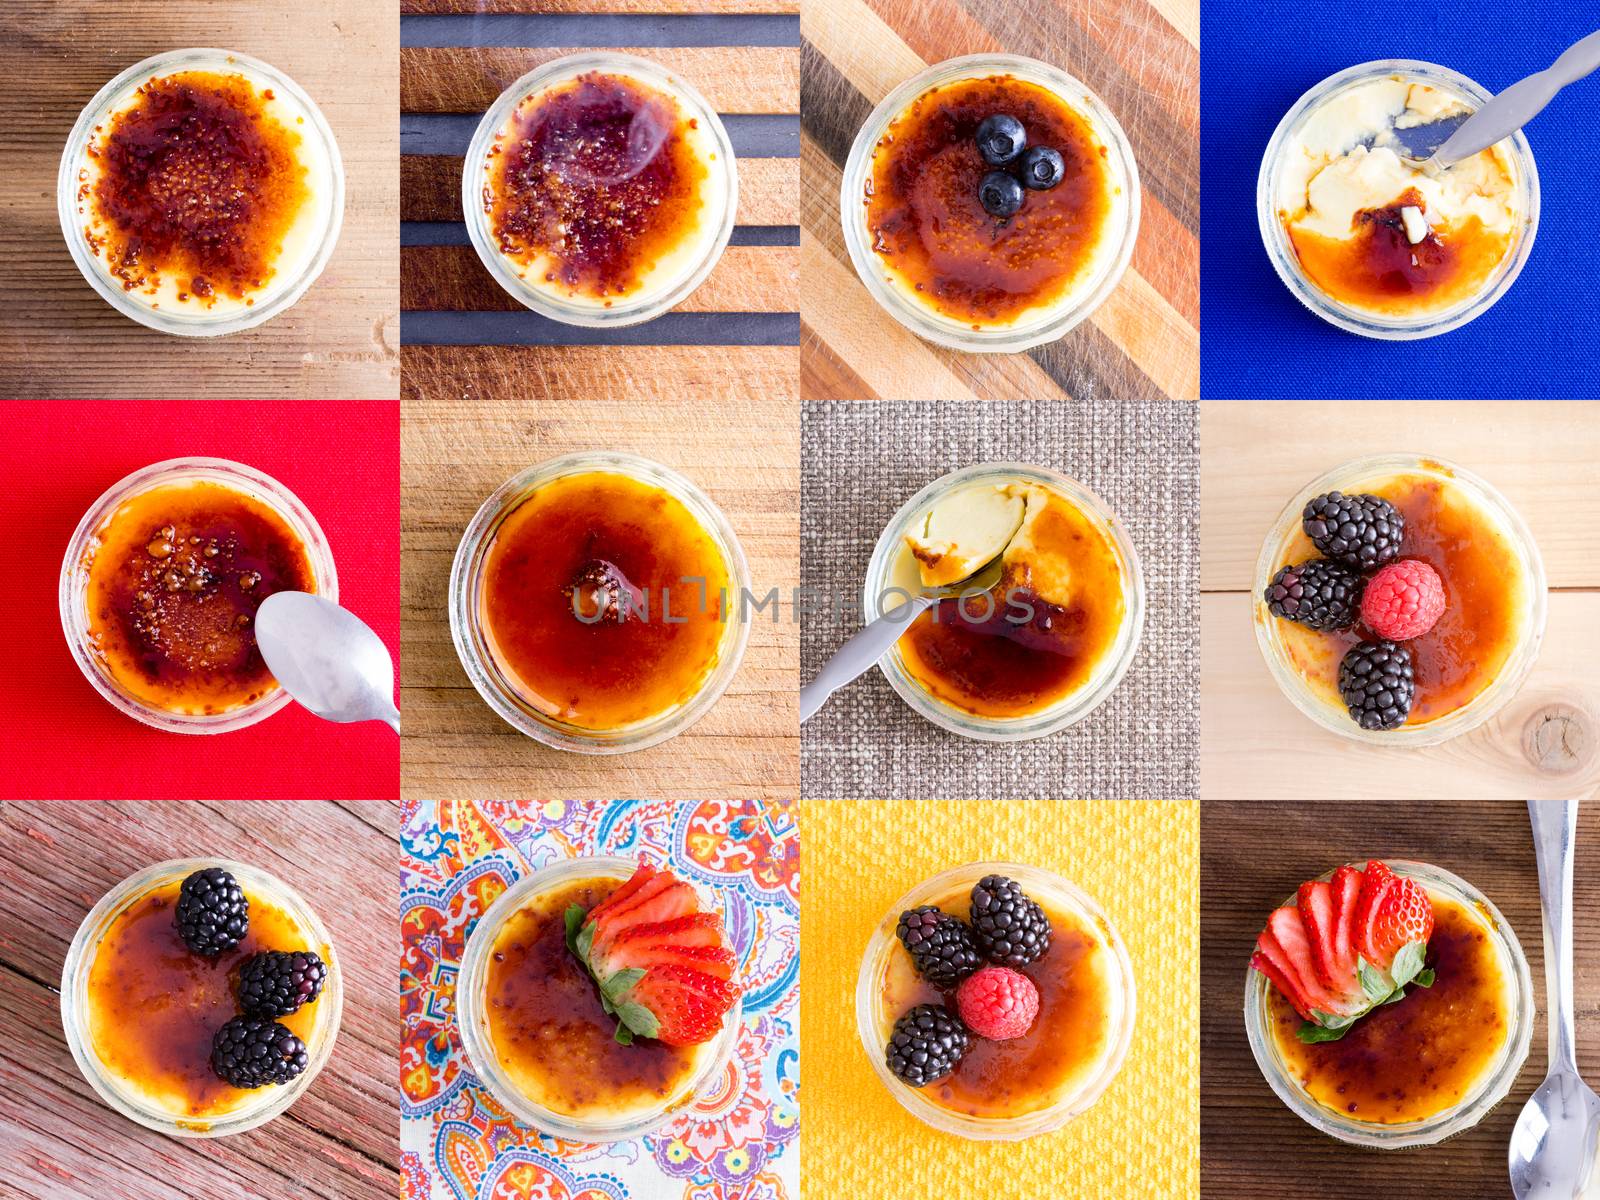 Twelve top down variations of delicious custard creme desert cups with various fruit toppings and pleasing table backgrounds